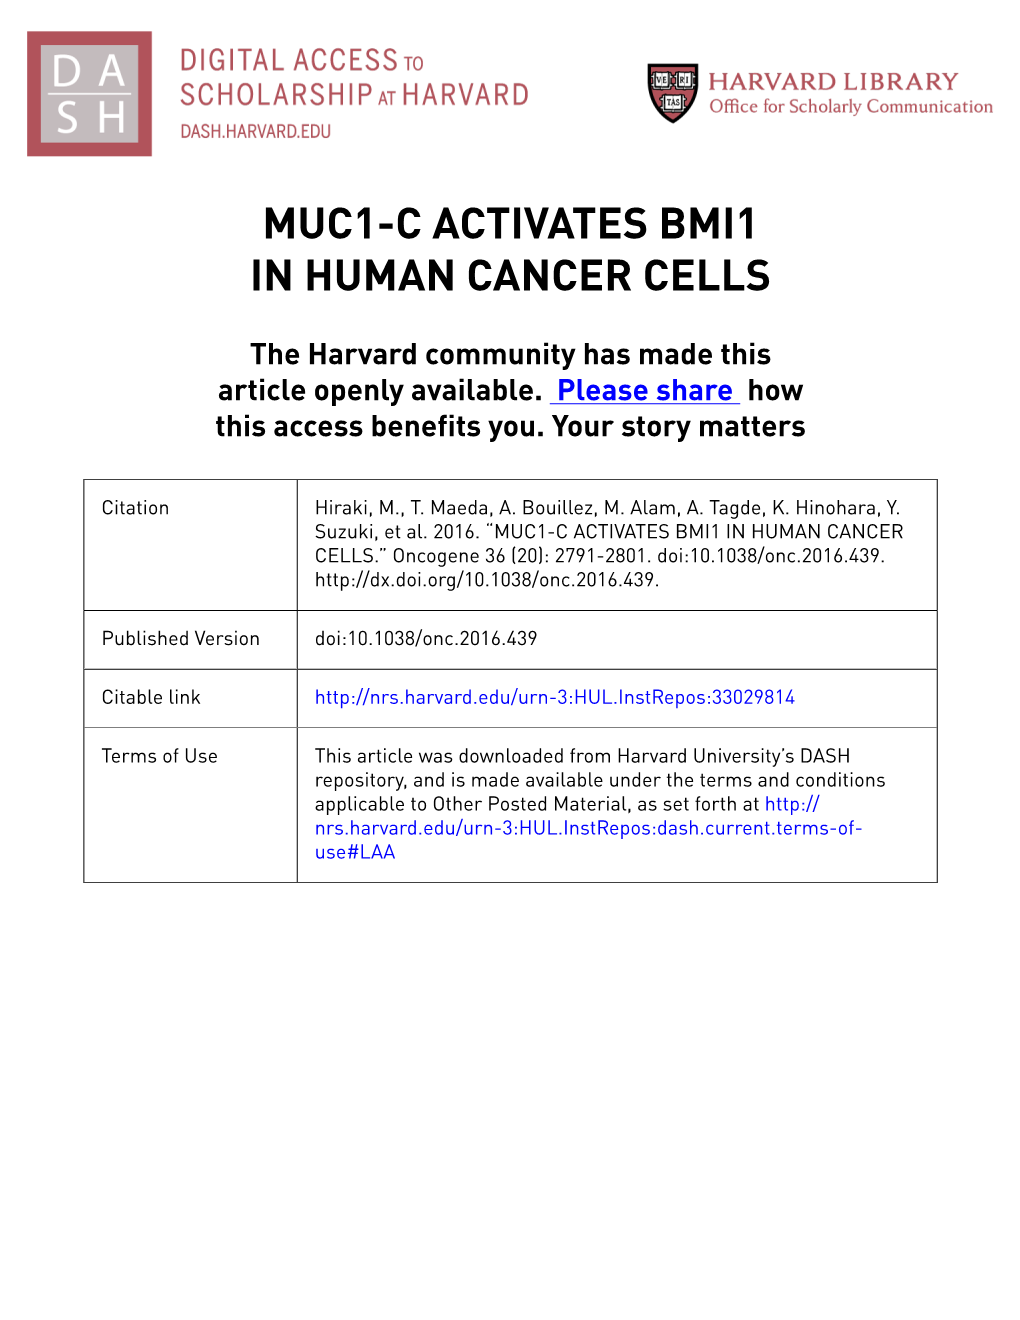 Muc1-C Activates Bmi1 in Human Cancer Cells